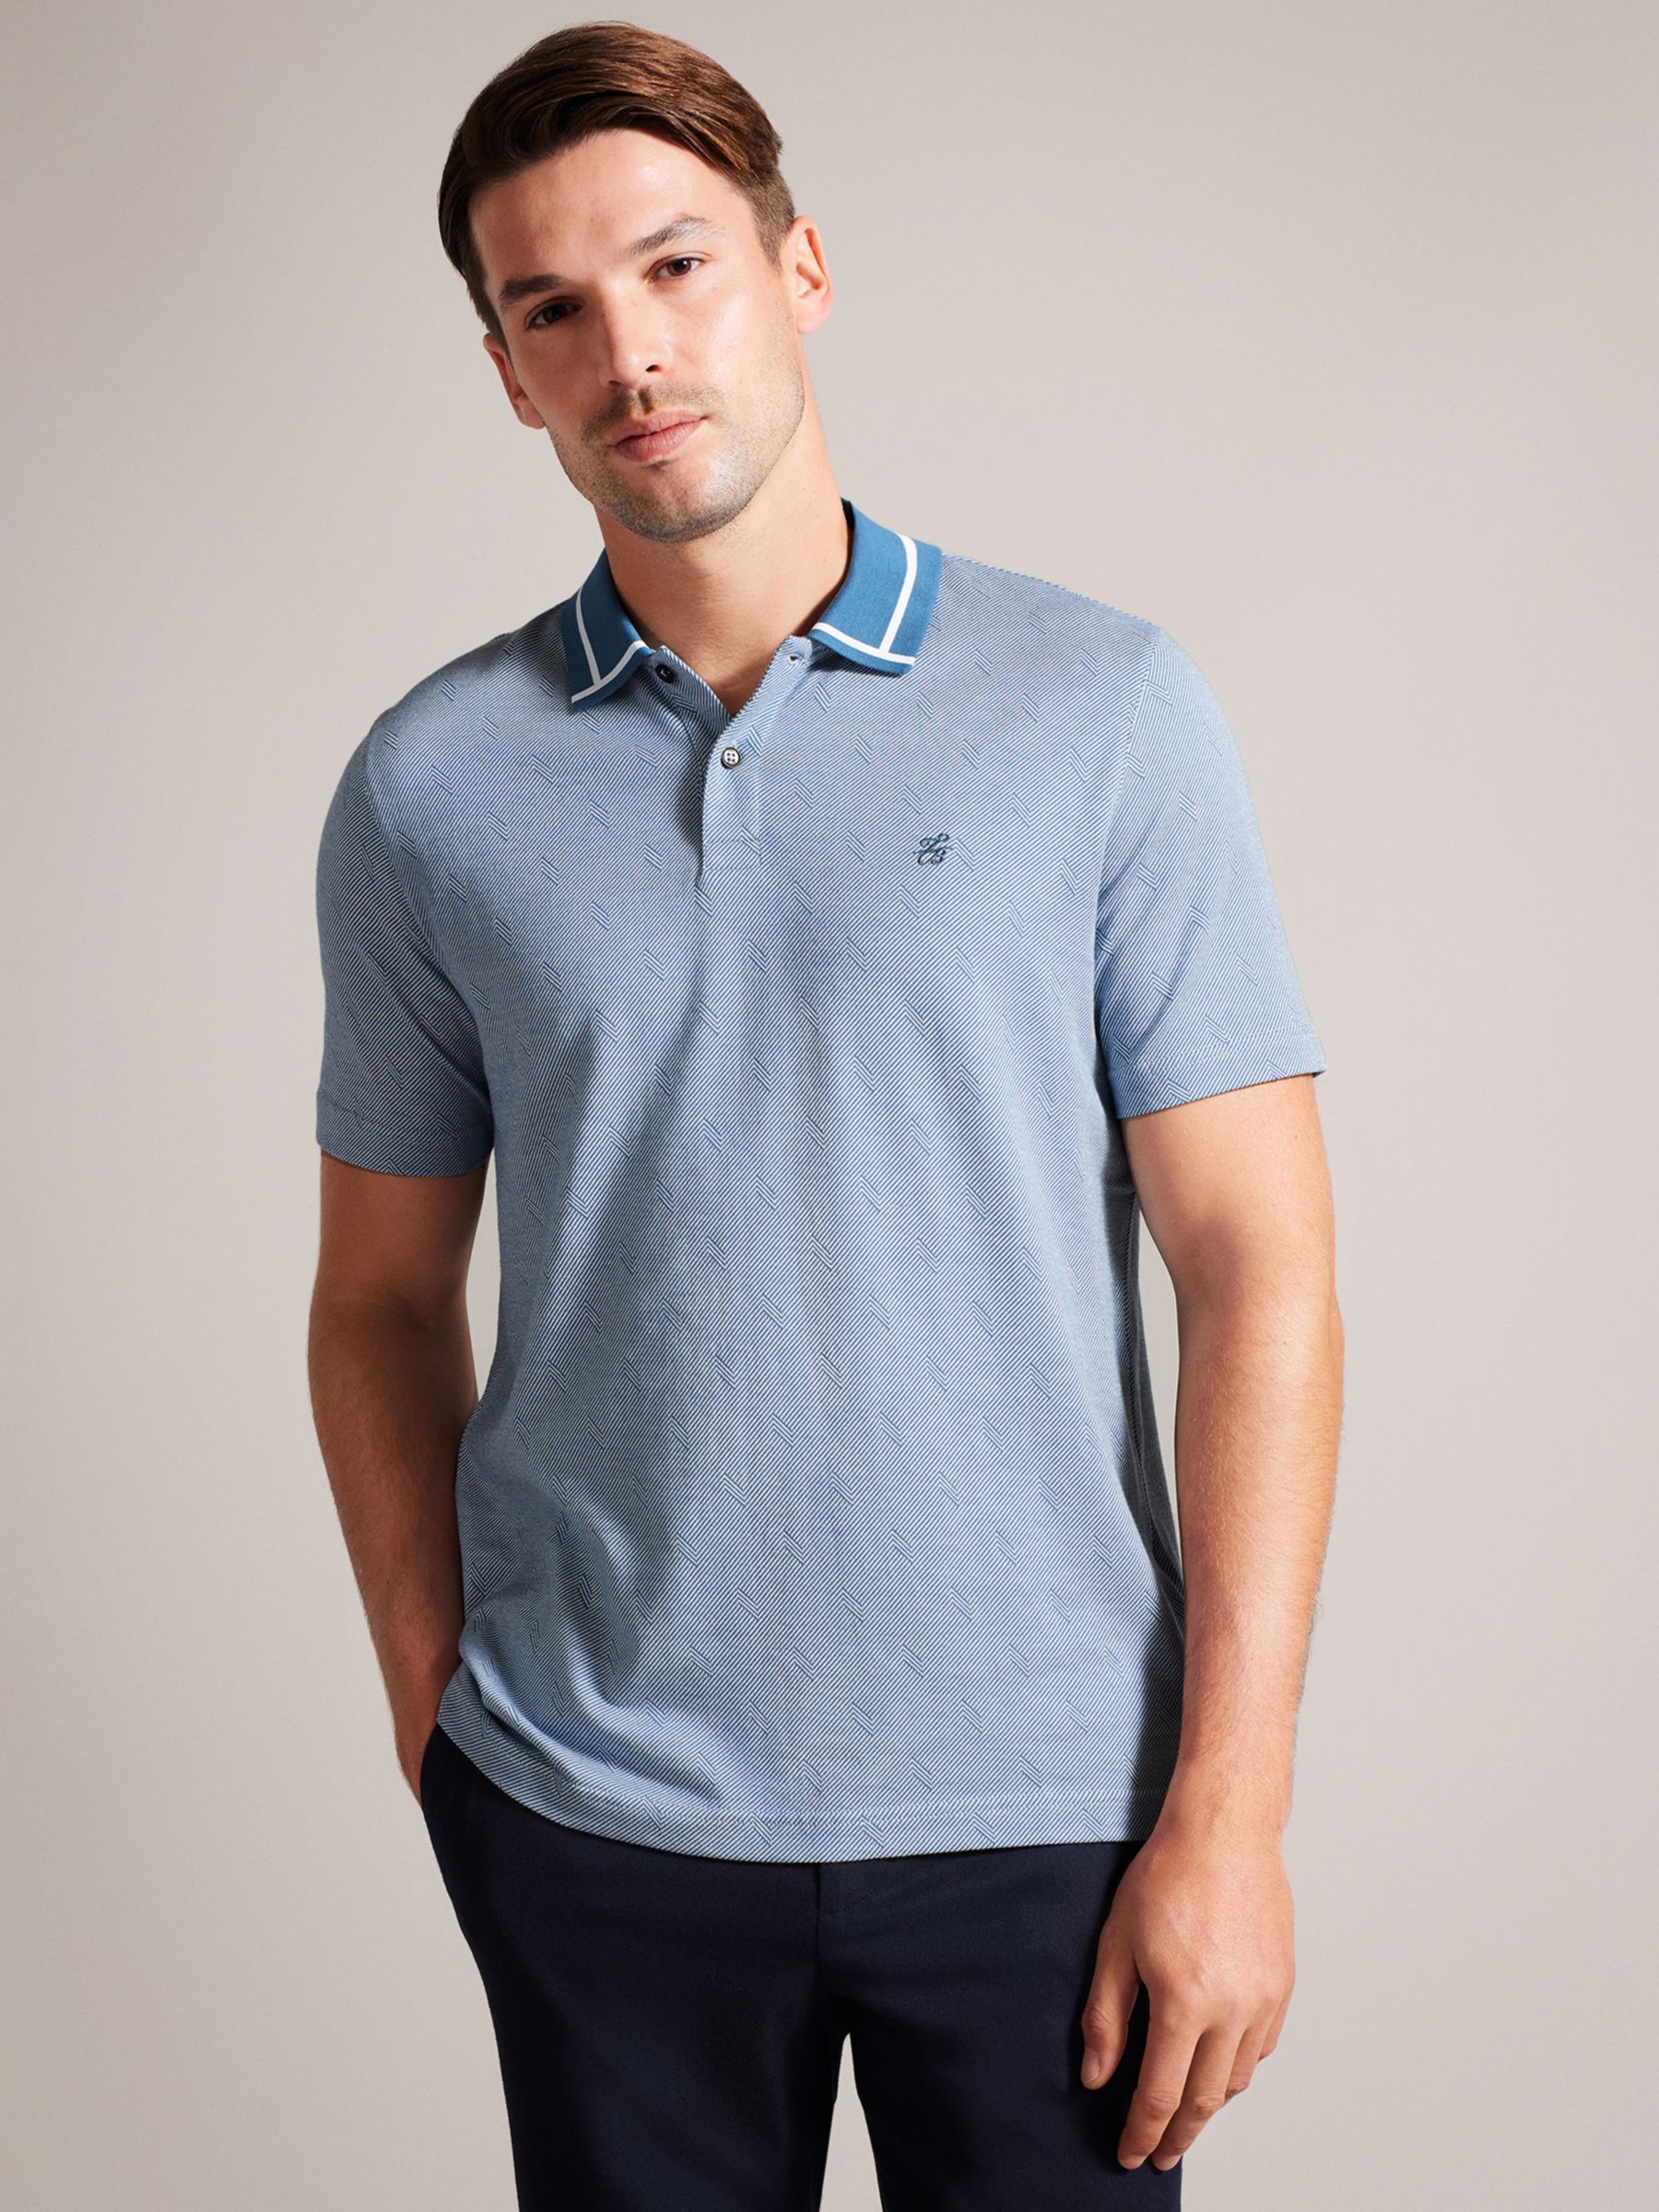 Men\'s Blue Polo & Rugby Shirts | John Lewis & Partners